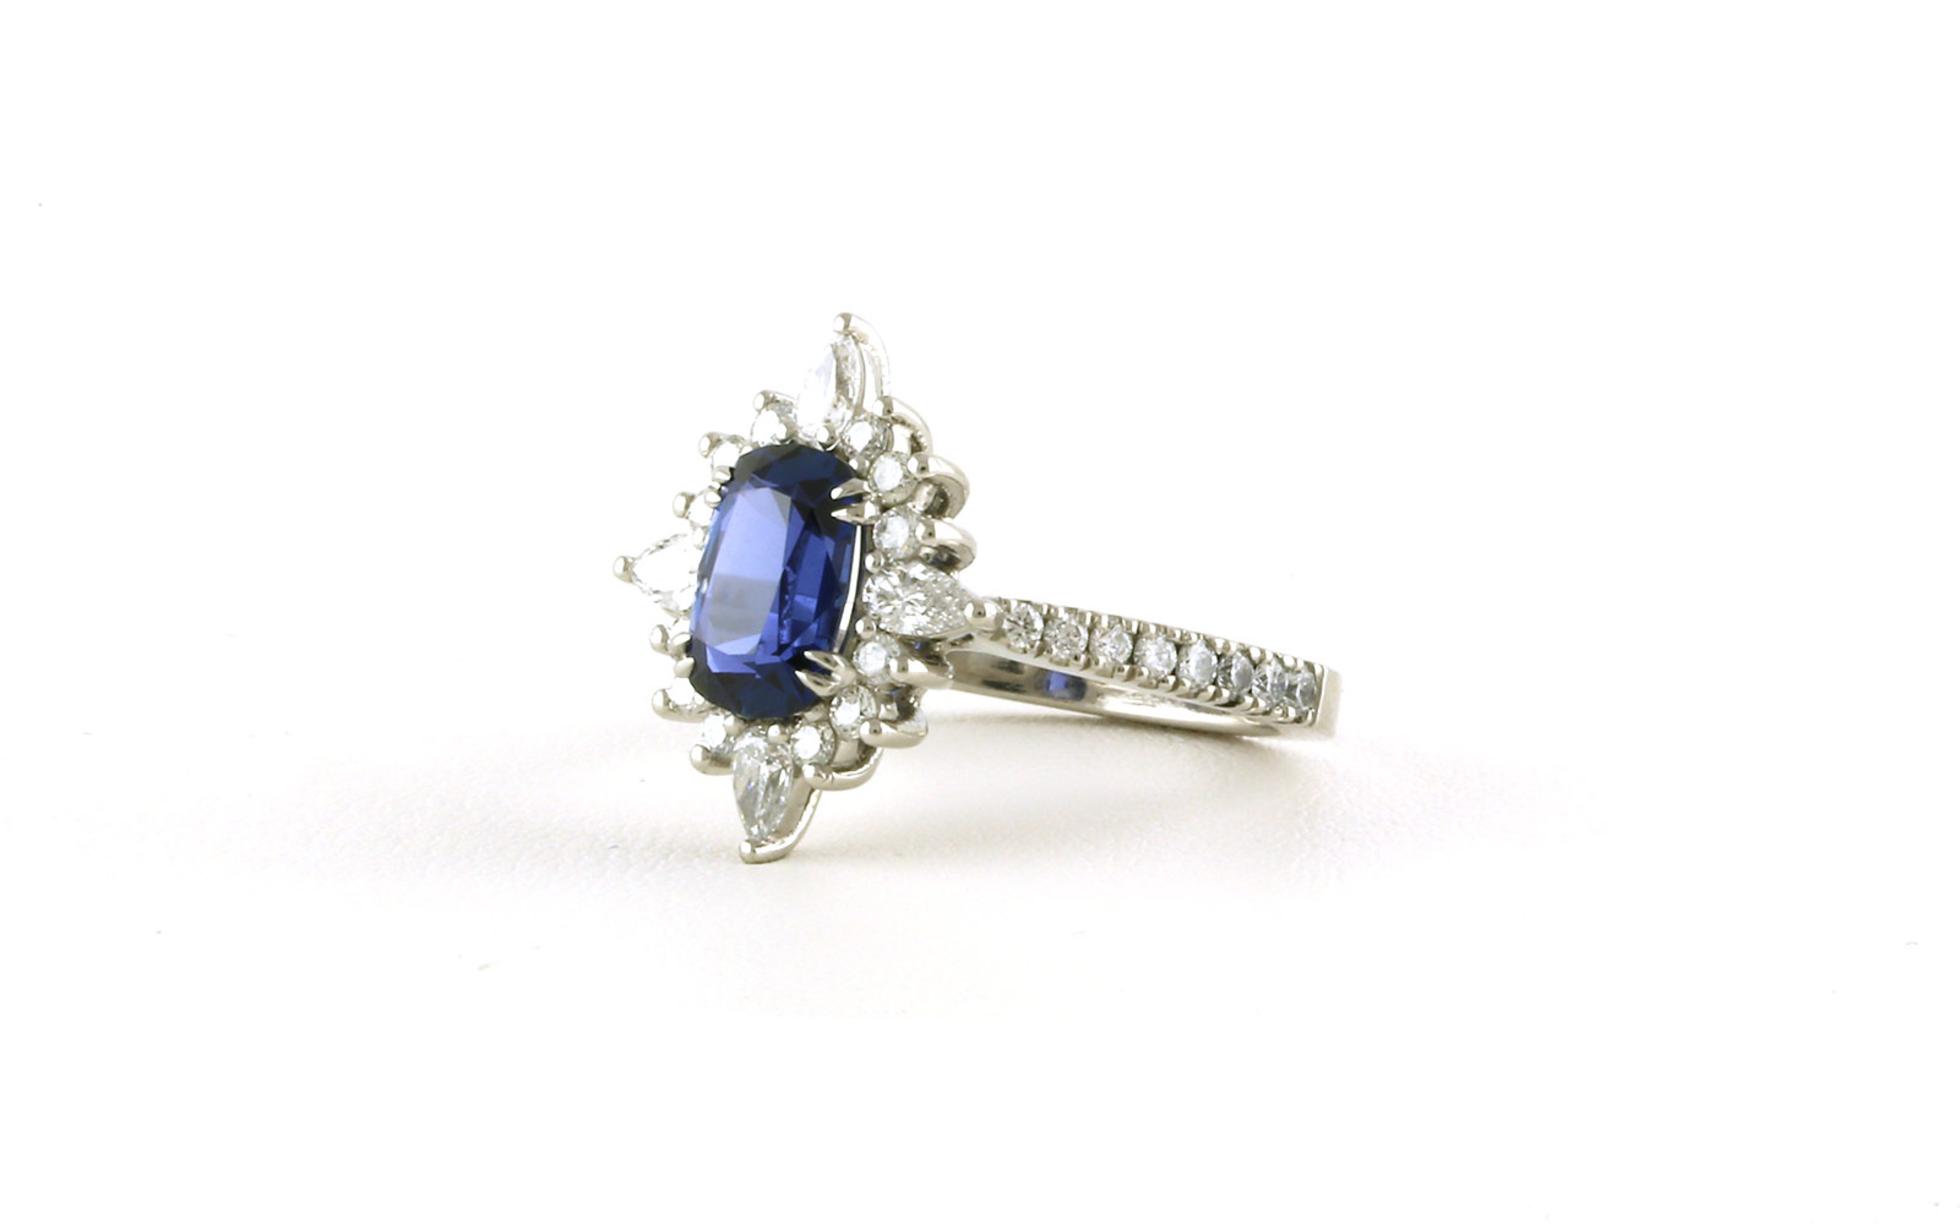 Celestial Halo-style Cushion-cut Montana Yogo Sapphire and Diamond Ring in White Gold (2.64cts TWT)